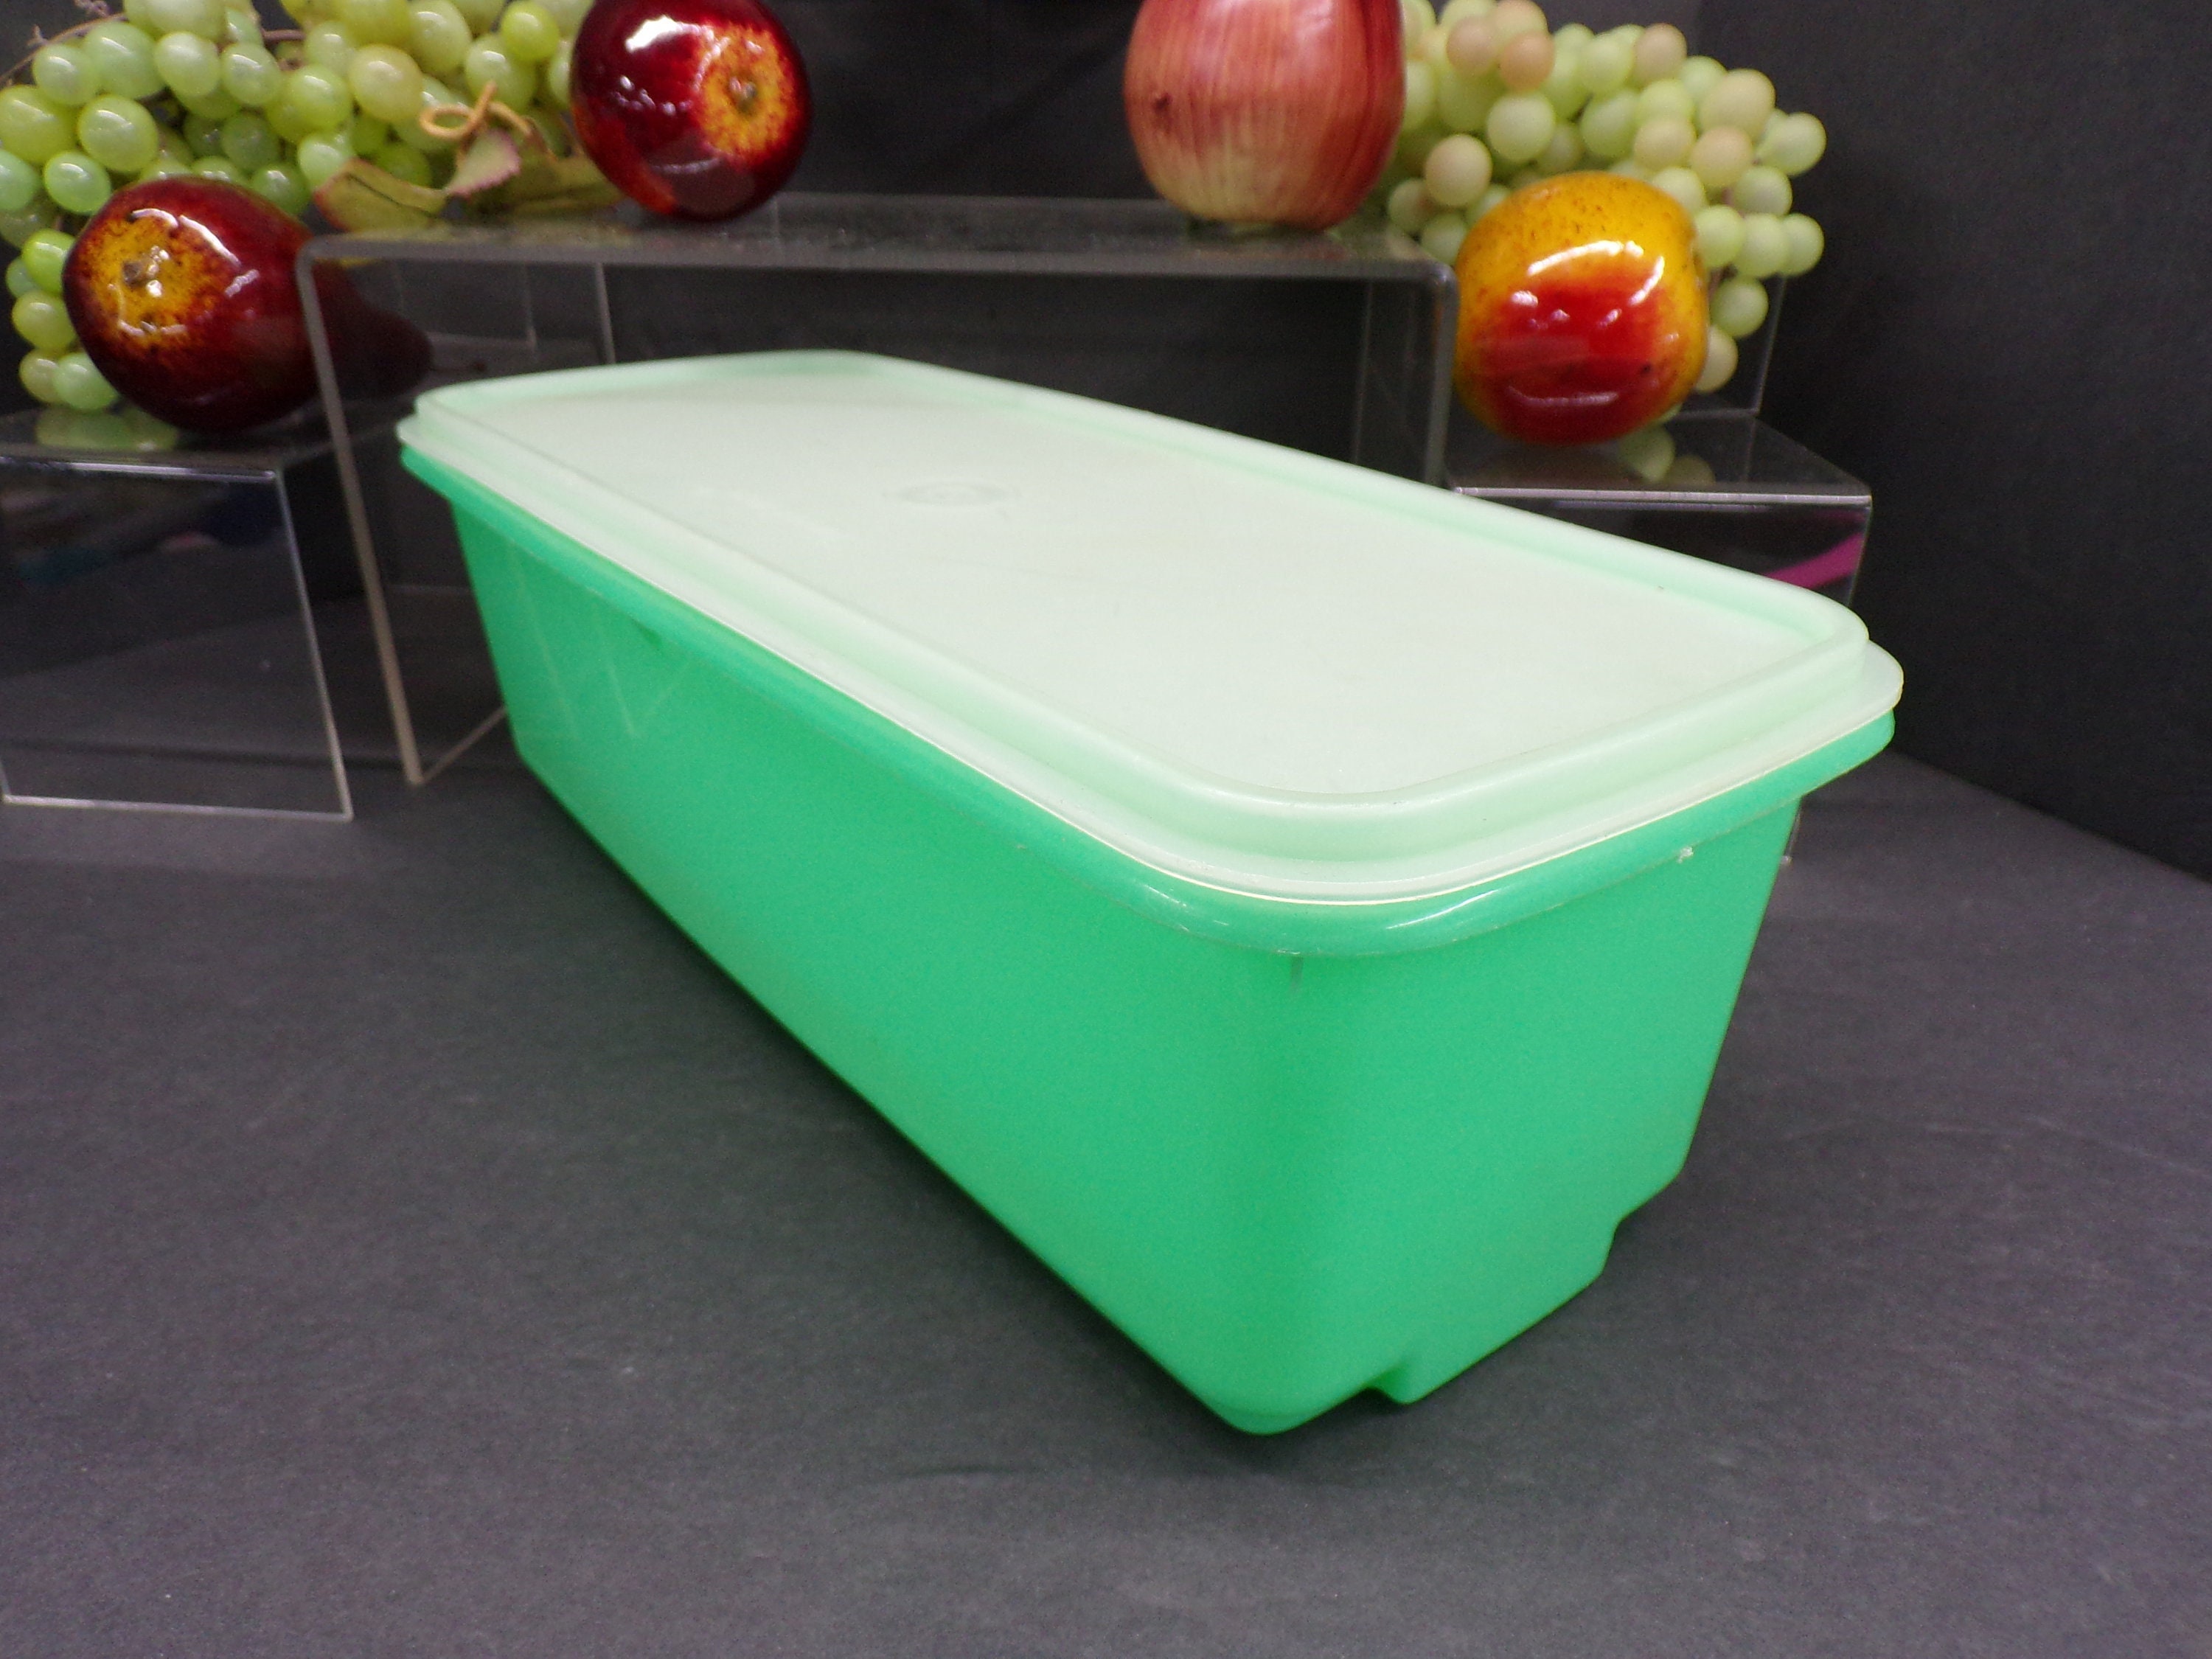 Stylish Vintage Tupperware Celery Keeper - Perfect for Storing Fruits and  Breads